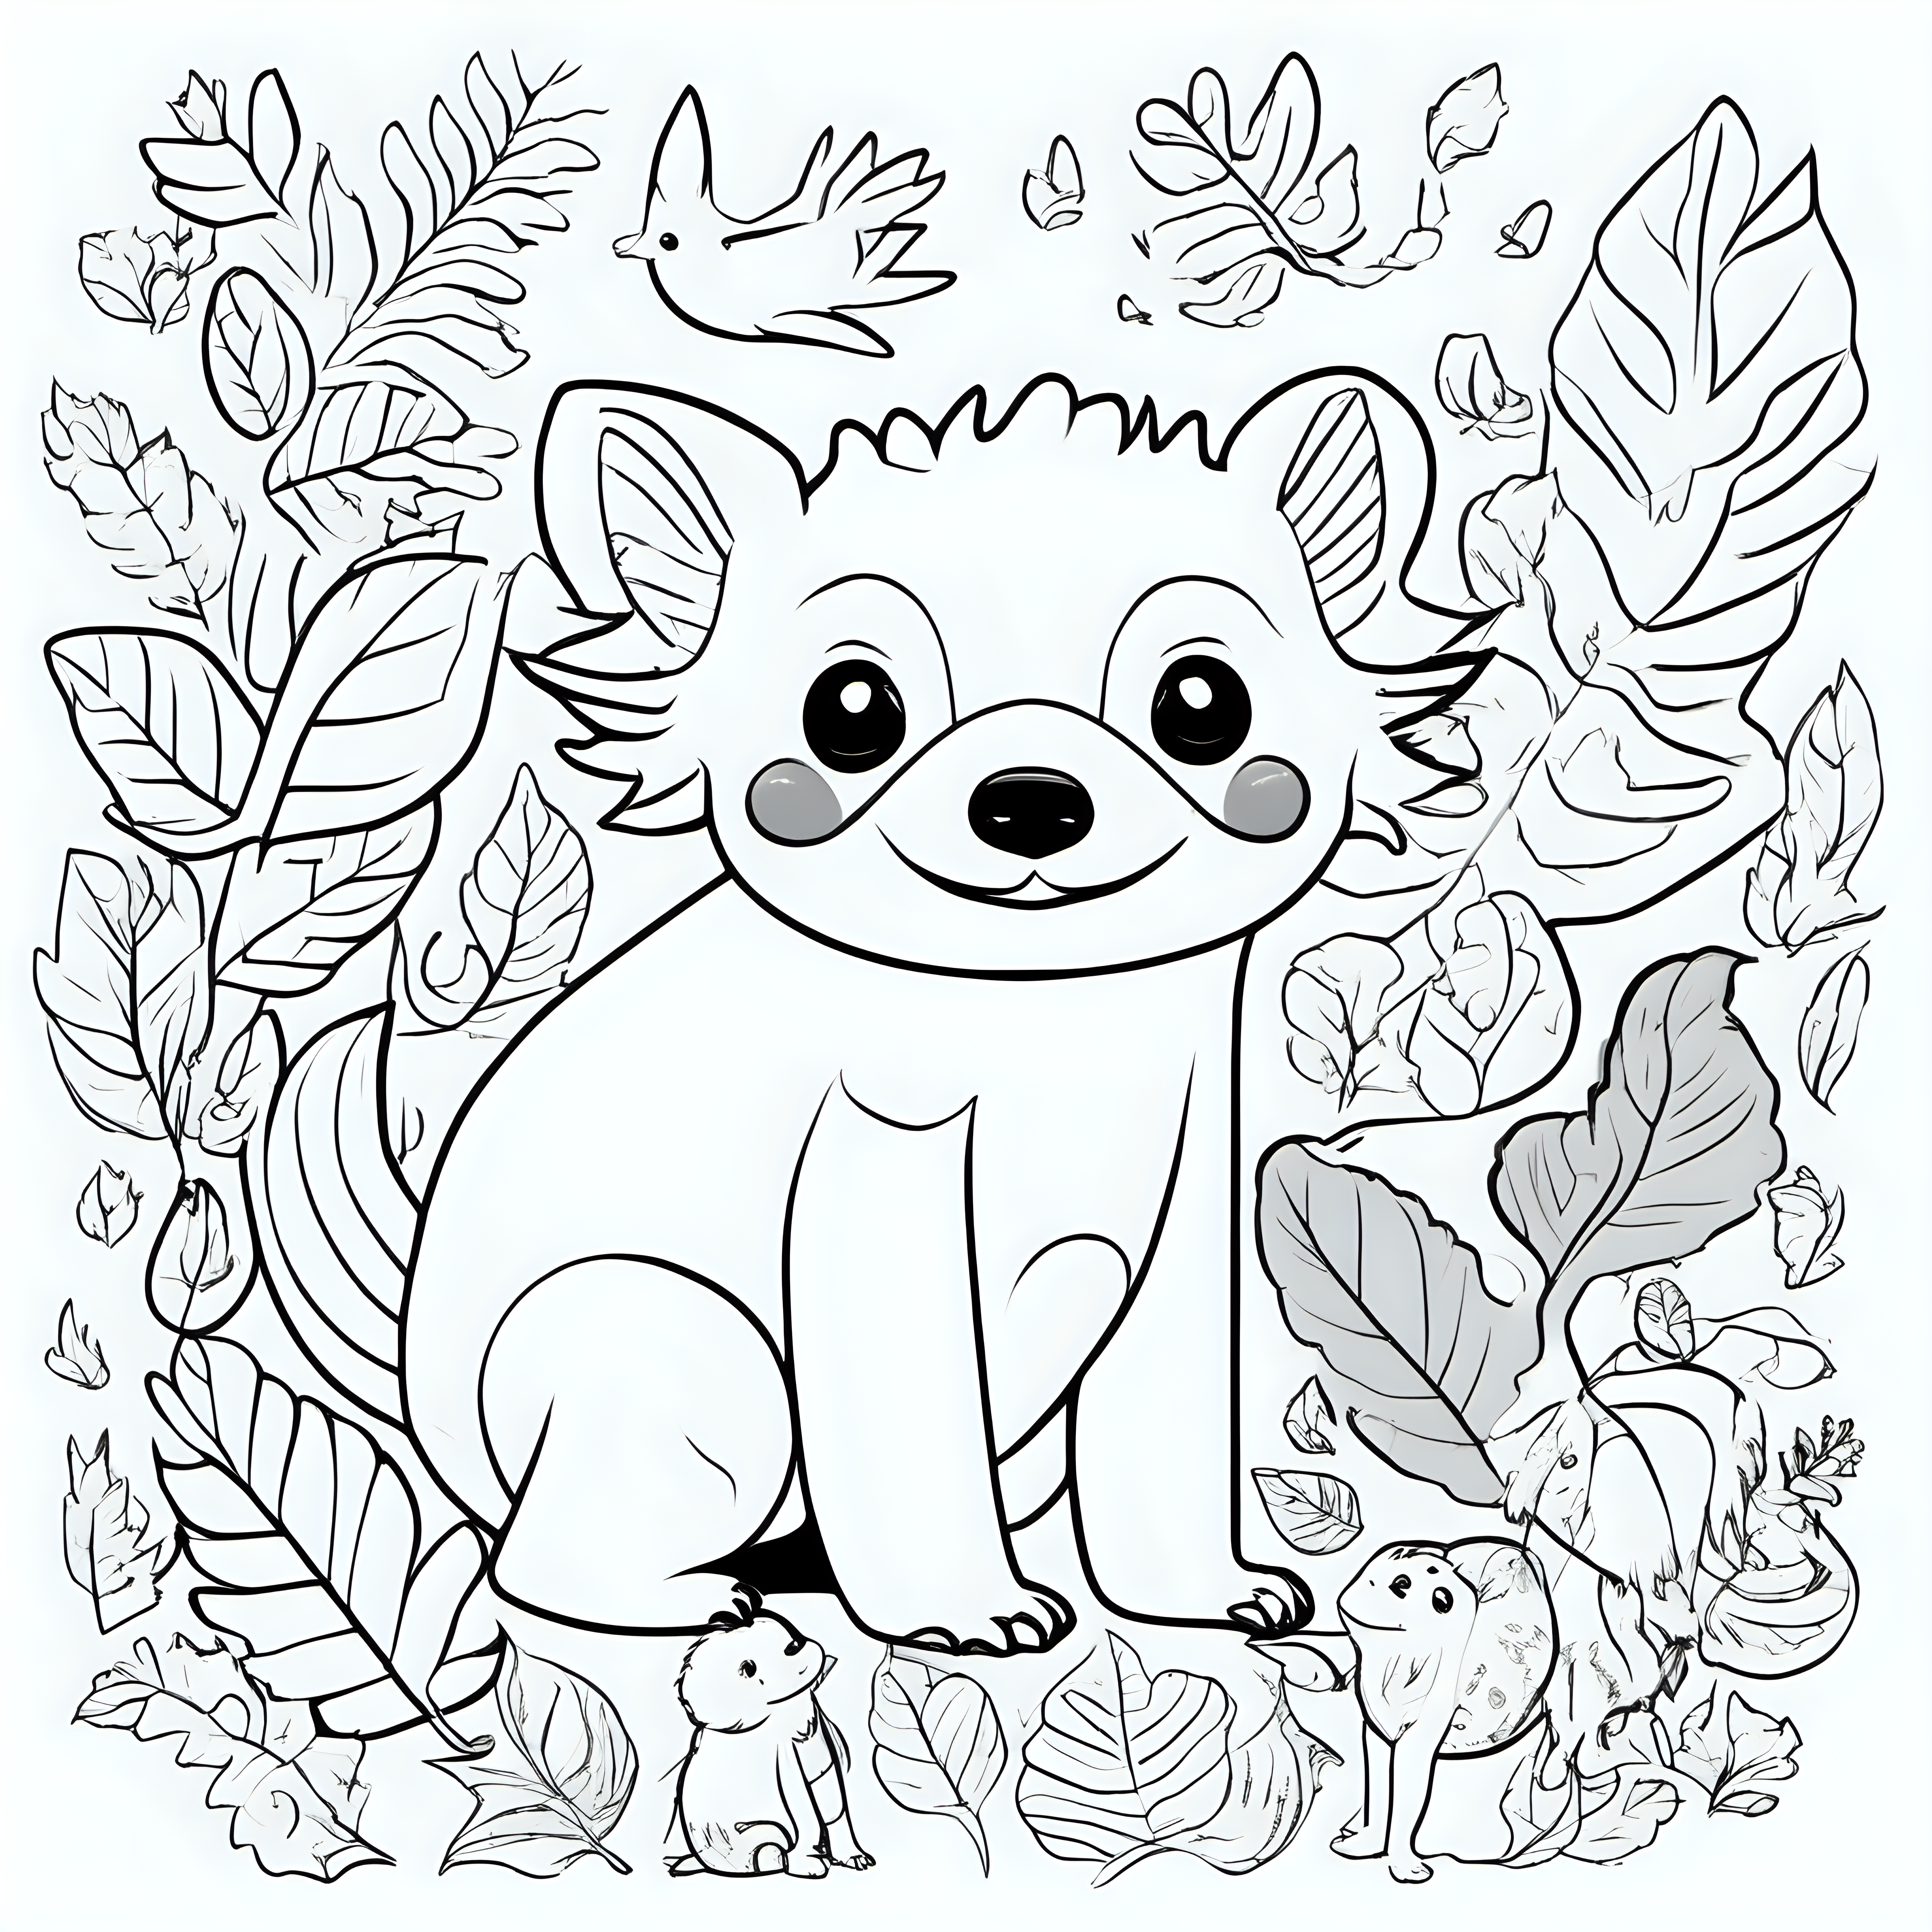 draw a colorful book cover for a coloring book for kids with cute animals dogs, 
Axolotl, birds and sloth with some leafs